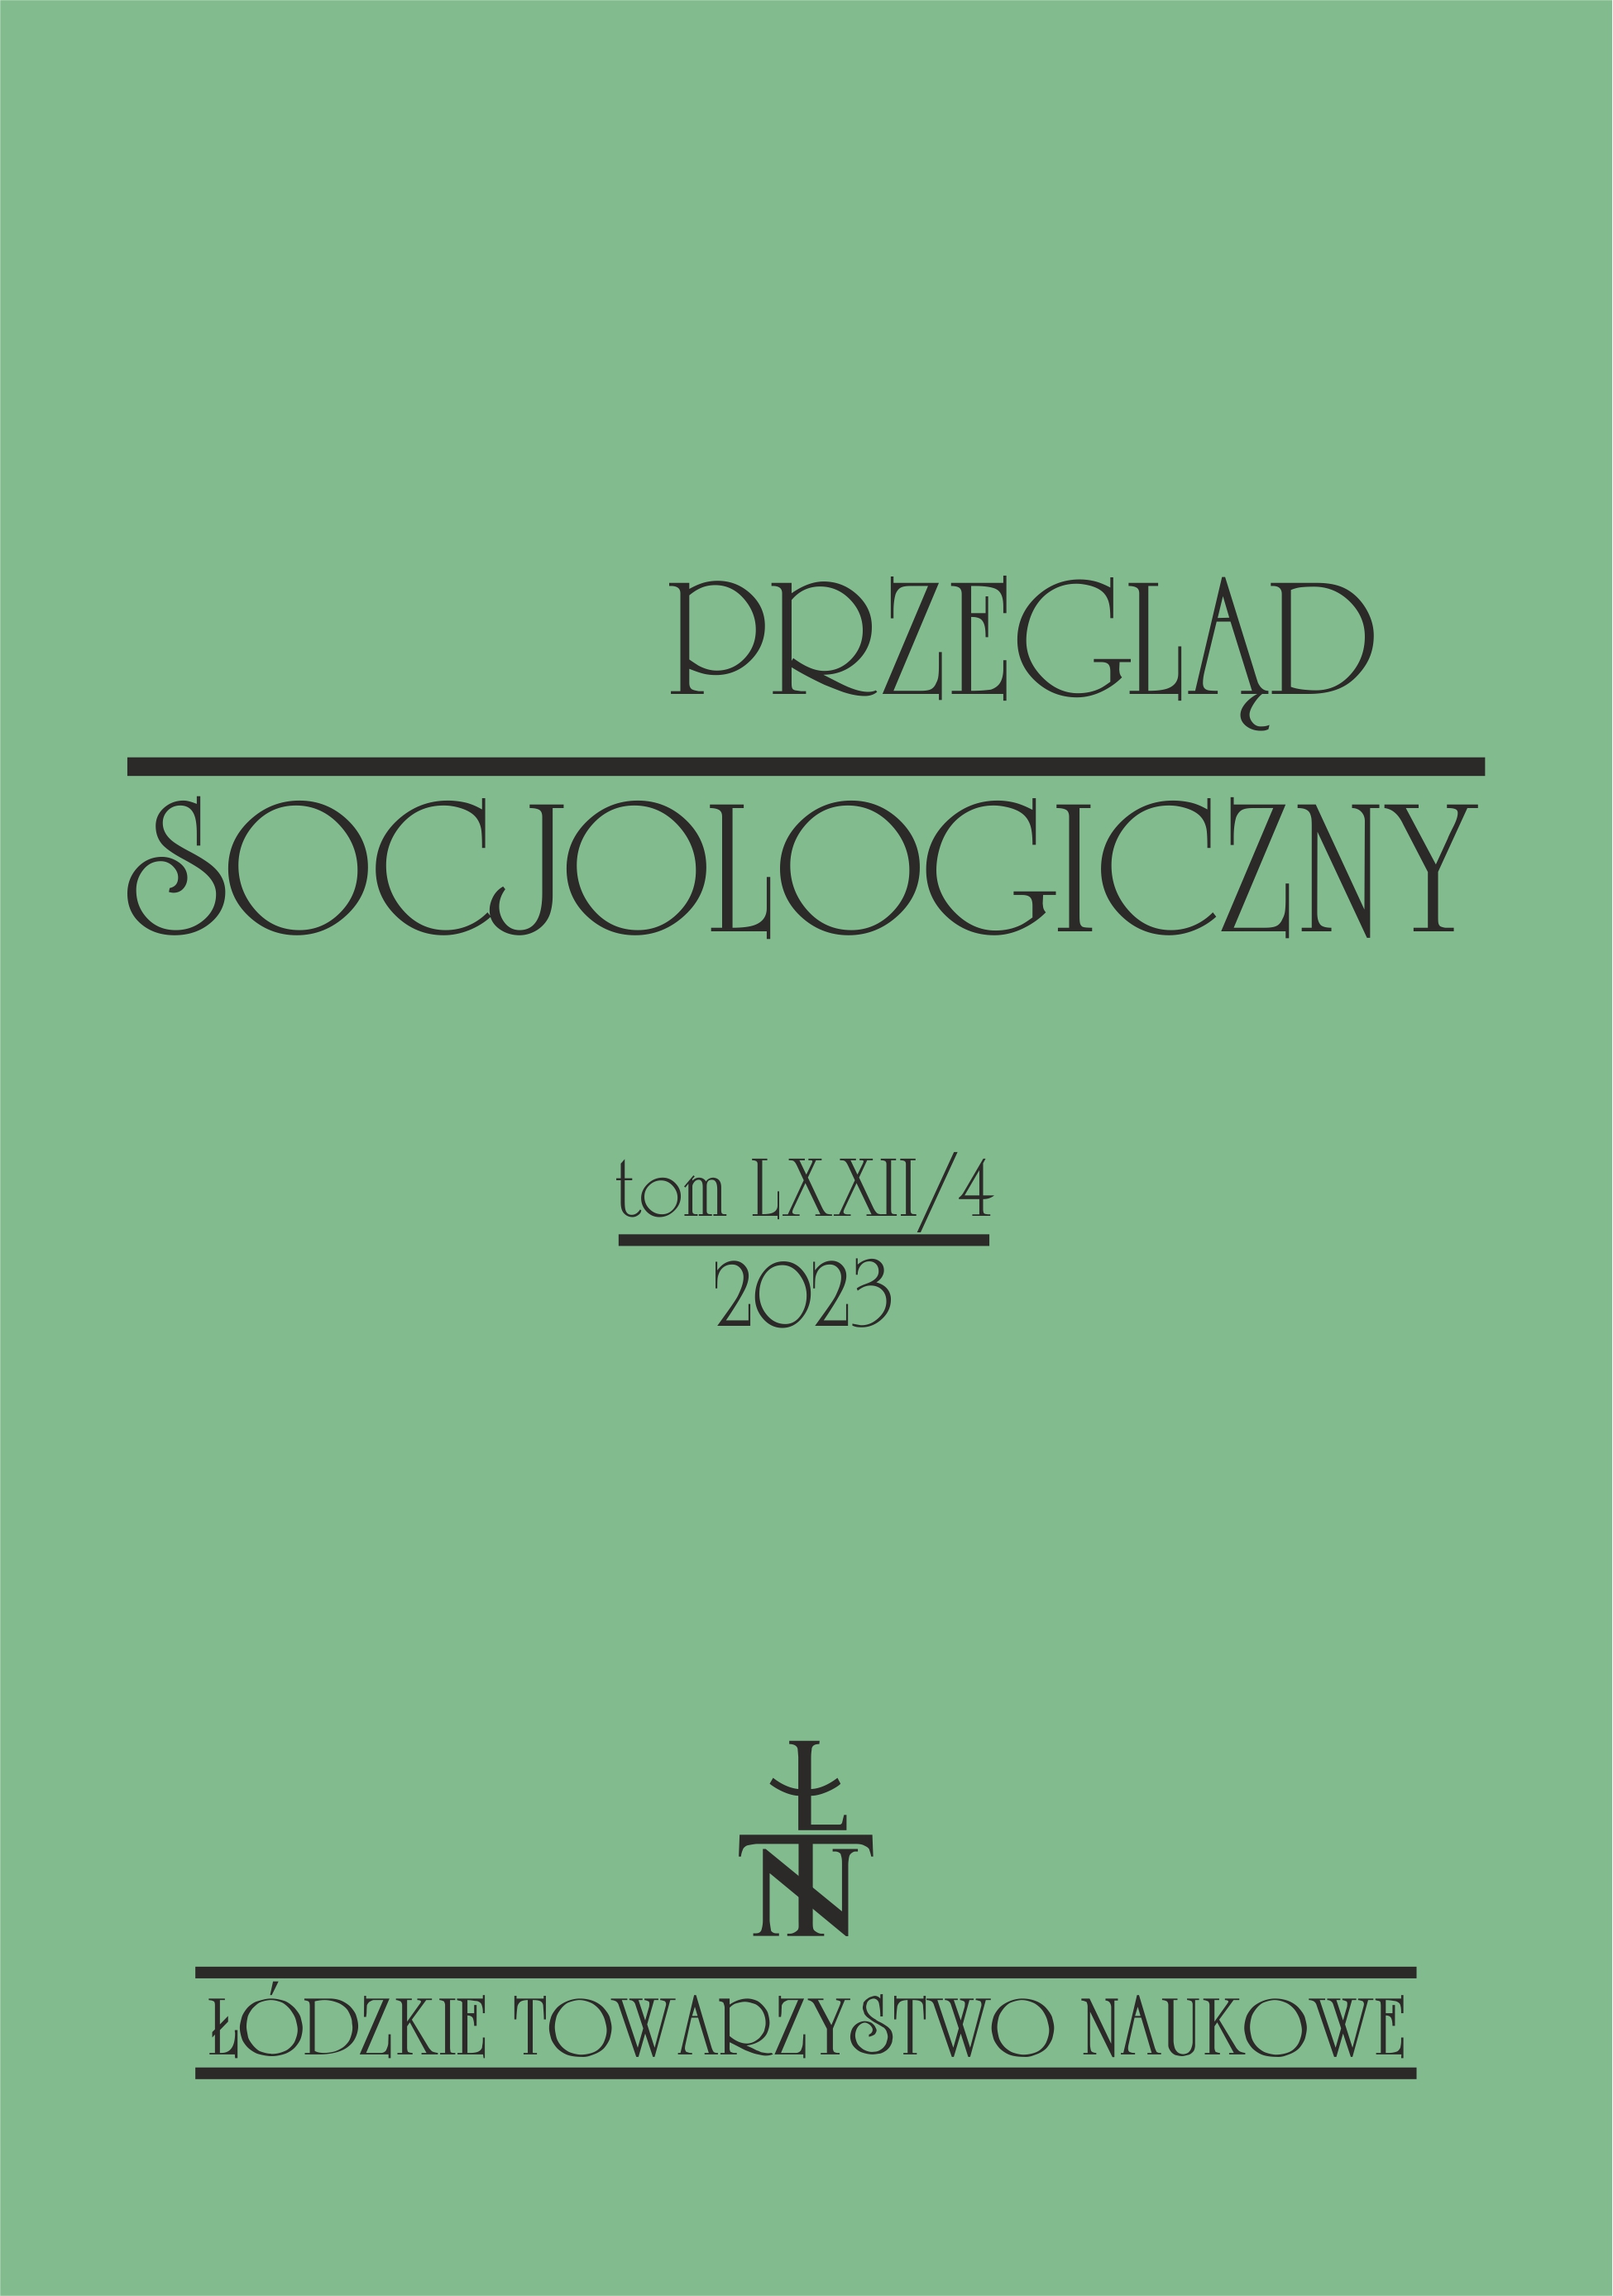 CIVIL SOCIETY IN THE SOCIAL CLASS MIRROR Cover Image